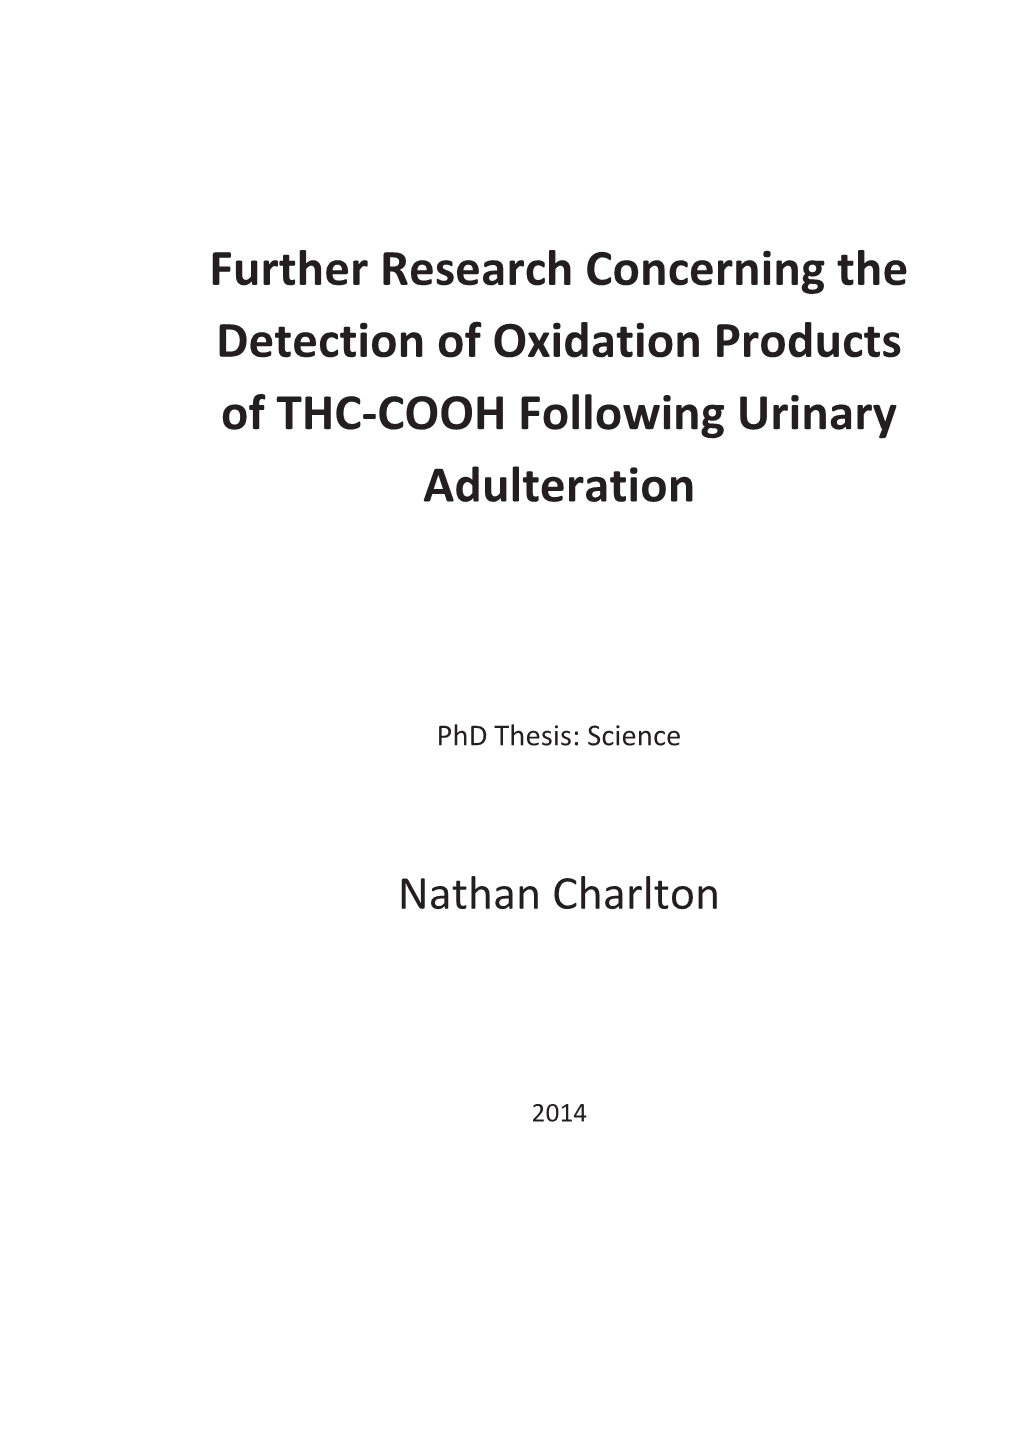 Further Research Concerning the Detection of Oxidation Products of THC-COOH Following Urinary Adulteration